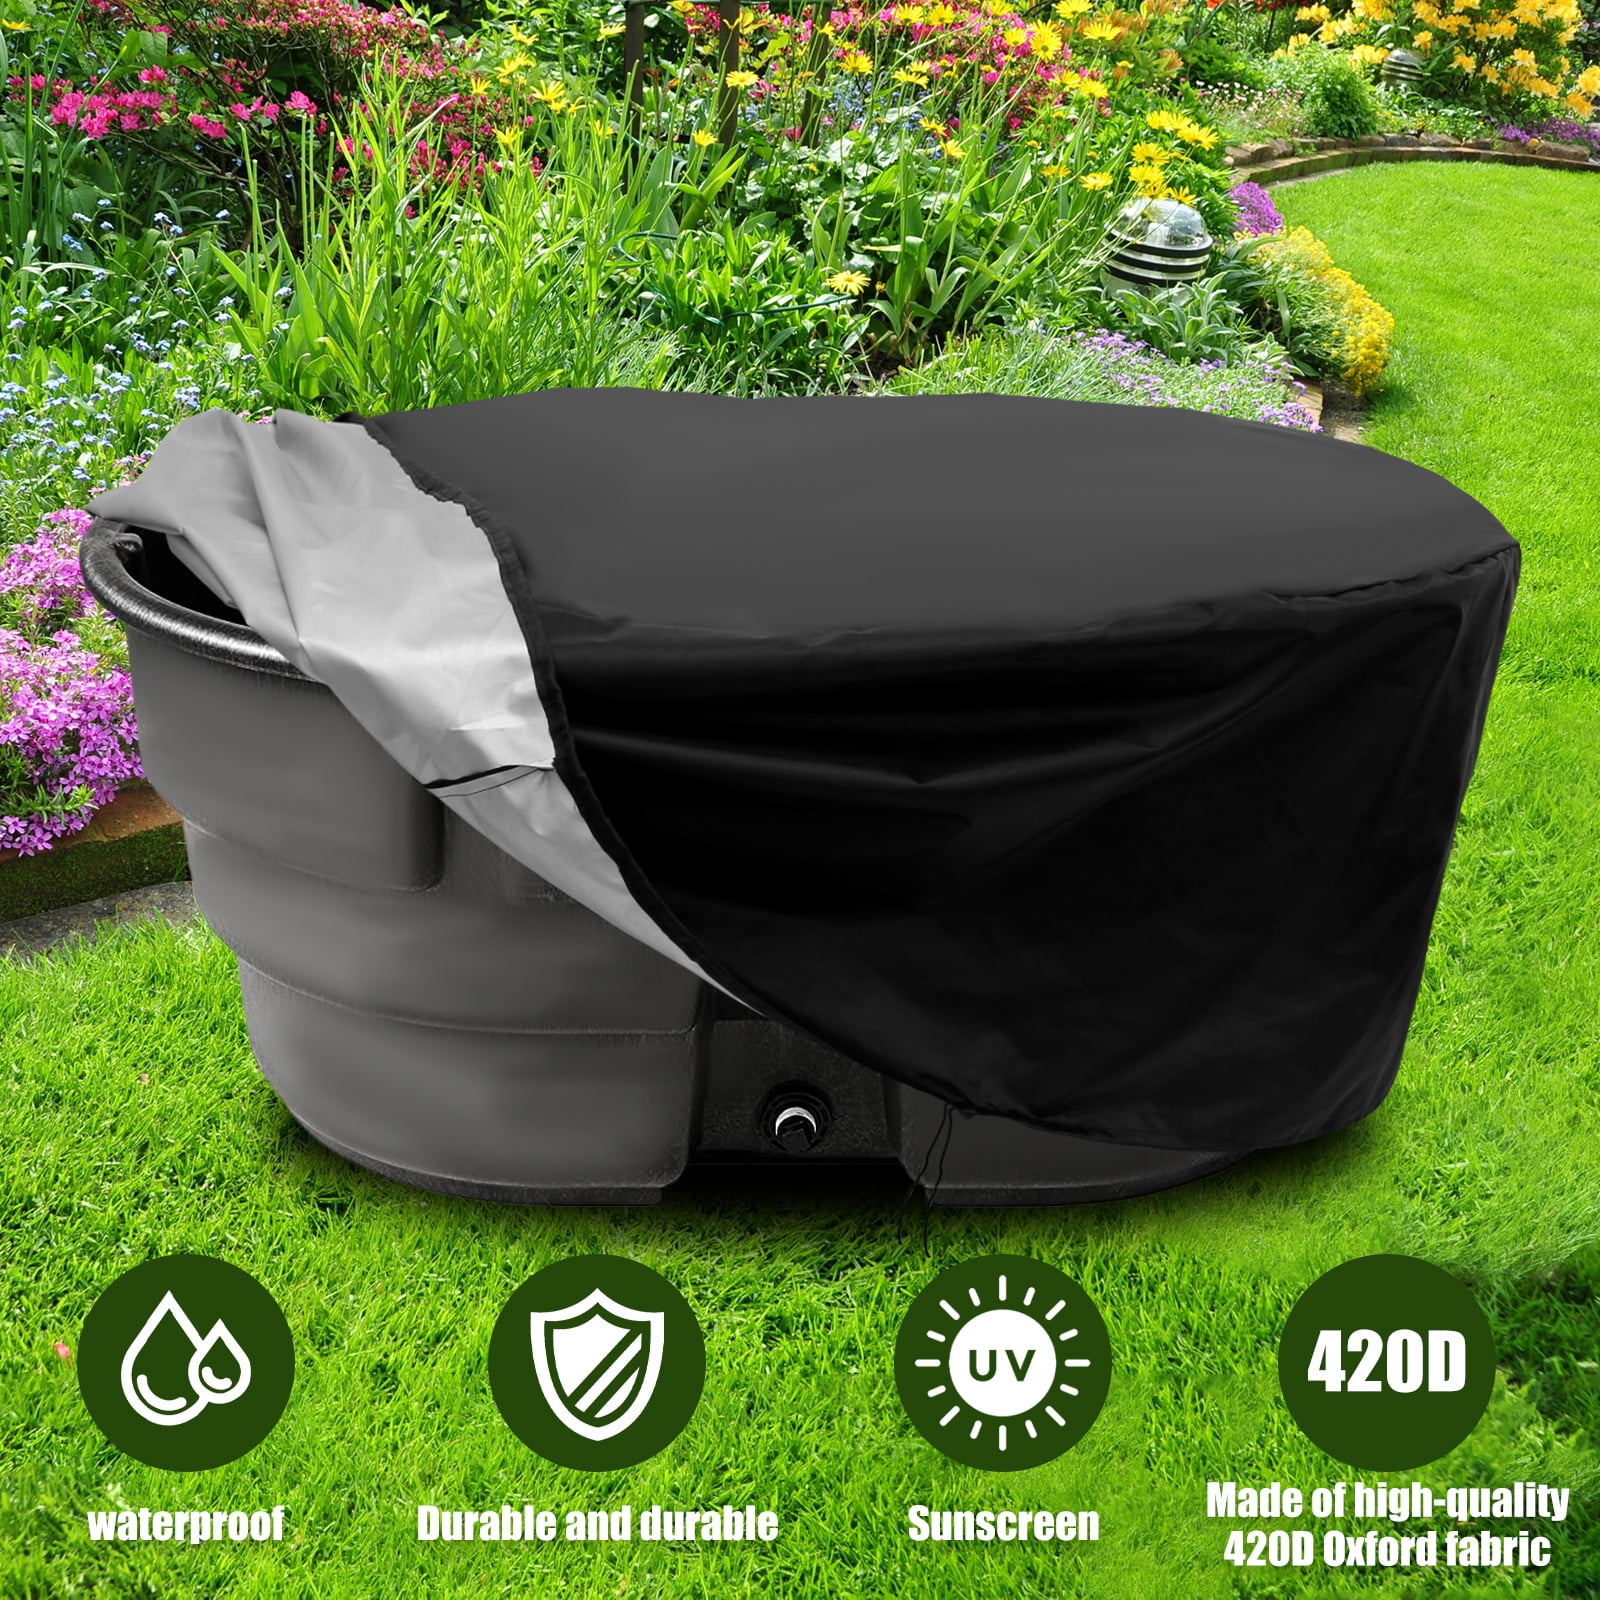  COSFUN 150 Gallon Ice Water Therapy Ice Bath Cover Cold Water  Cover ,Waterproof Heavy Duty Oval Stock Tank Cover,Black : Patio, Lawn &  Garden